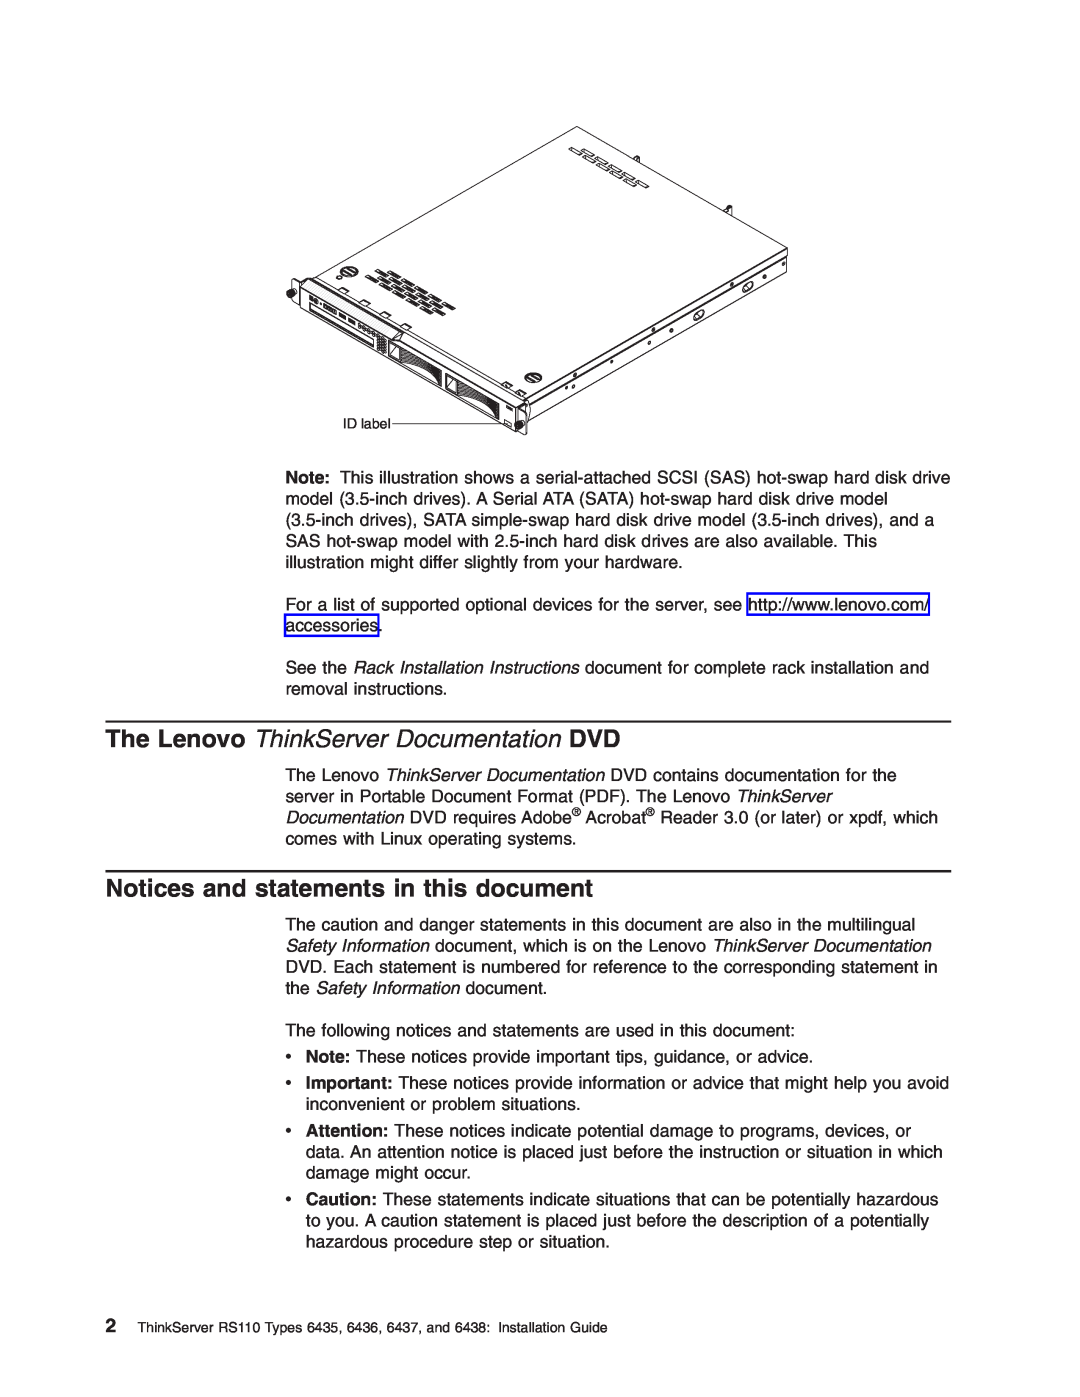 Lenovo 6438, 6437, 6436, 6435 manual Notices and statements in this document, The Lenovo ThinkServer Documentation DVD 